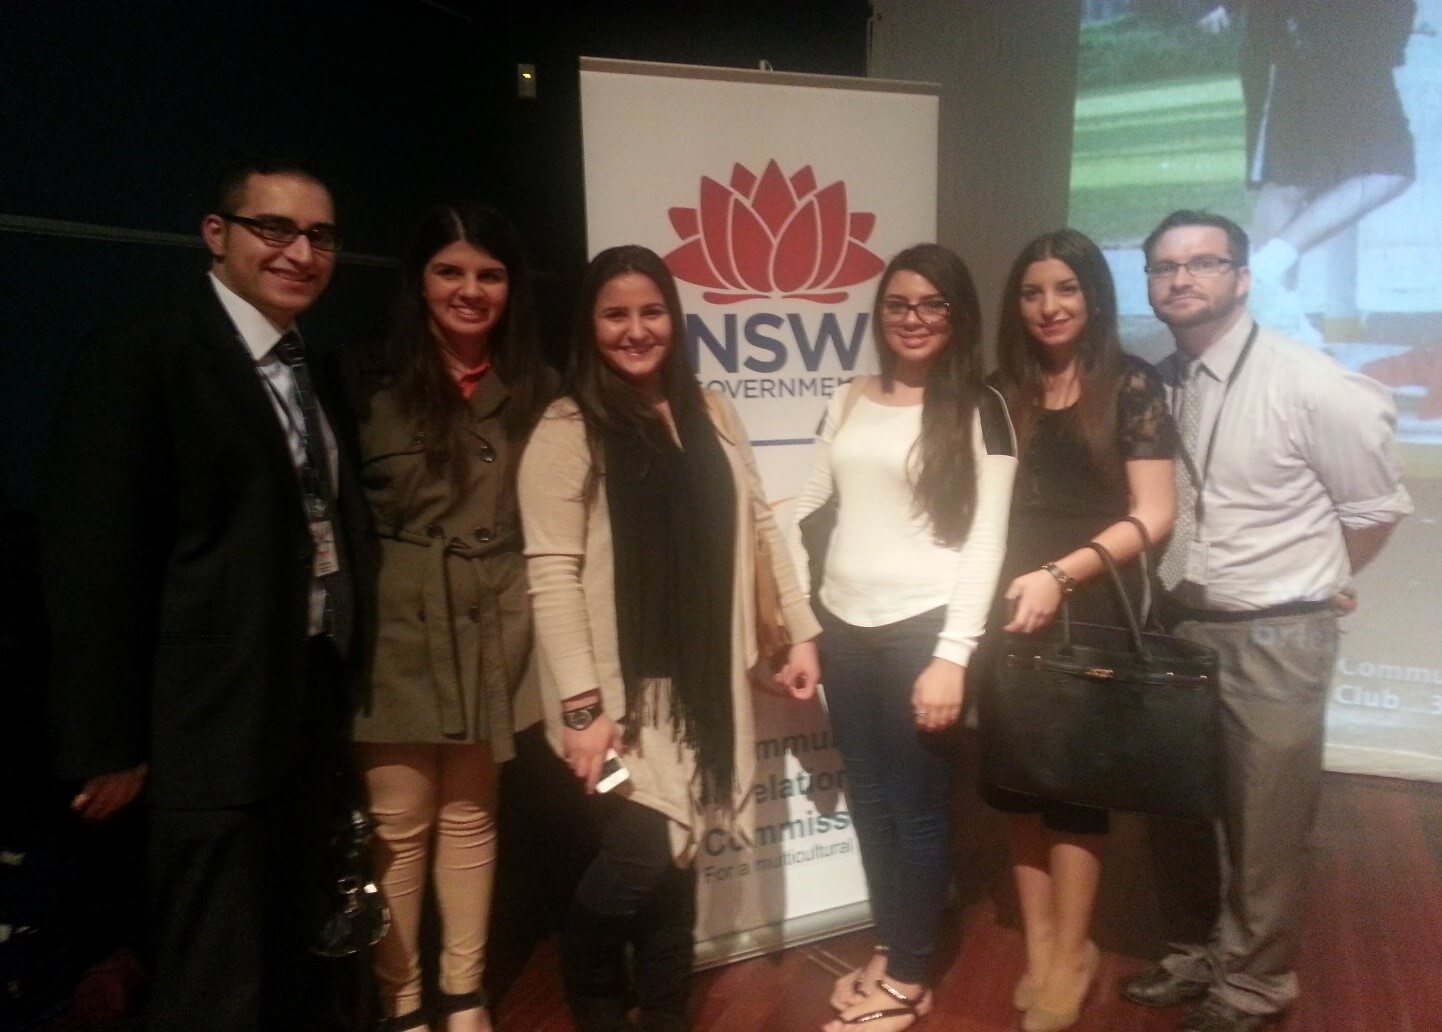 Representing the Assyrian youth.
From Left to Right: Deacon Oliver Slewa, Youth Officer, Assyrian Resource Centre
Ms Ninorta William
Ms Robina Yonan
Ms Sandra Odisho
Ms Maryam Hormoz
Mr Peter Hope, Community Project Officer, Fairfield City Council.